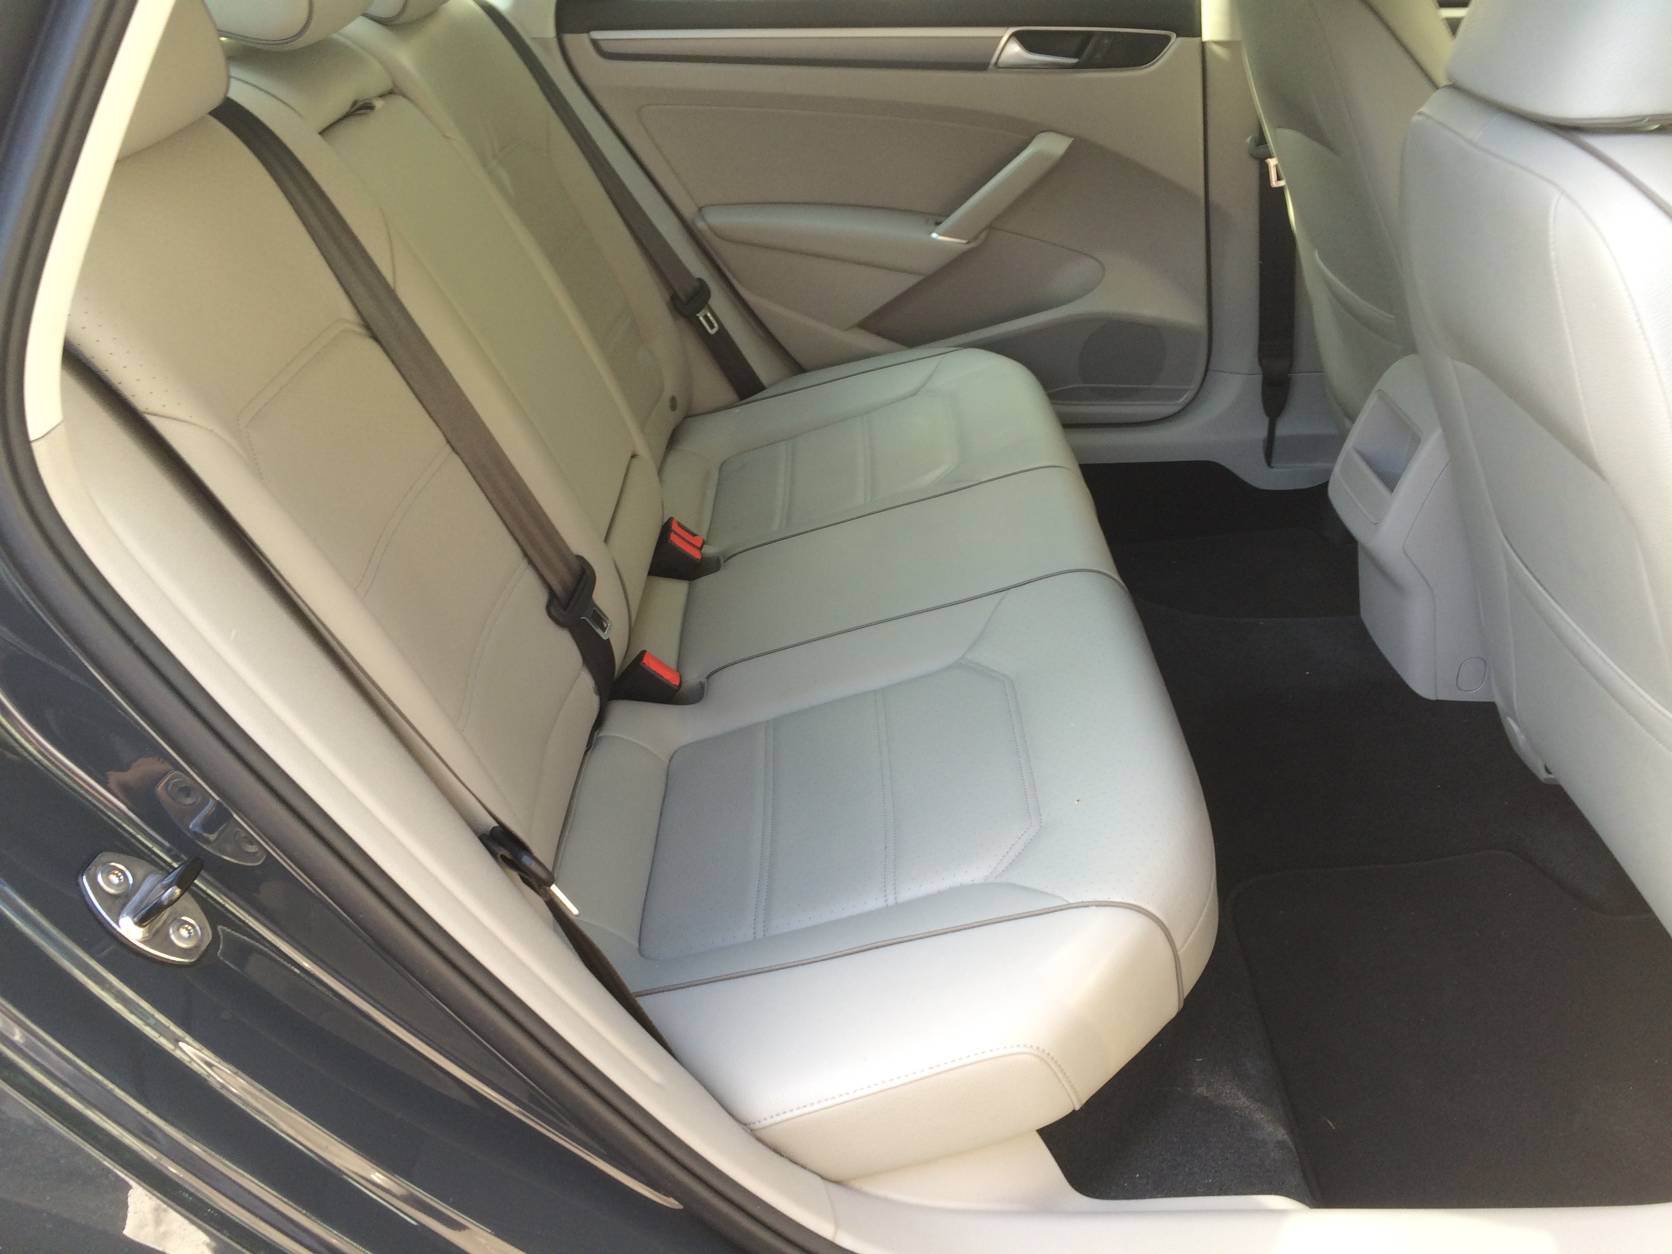 Leg and headroom shouldn’t be a problem in the back seat of the Volkswagen Passat R-Line, says WTOP Car Guy Mike Parris. (WTOP/Mike Parris)